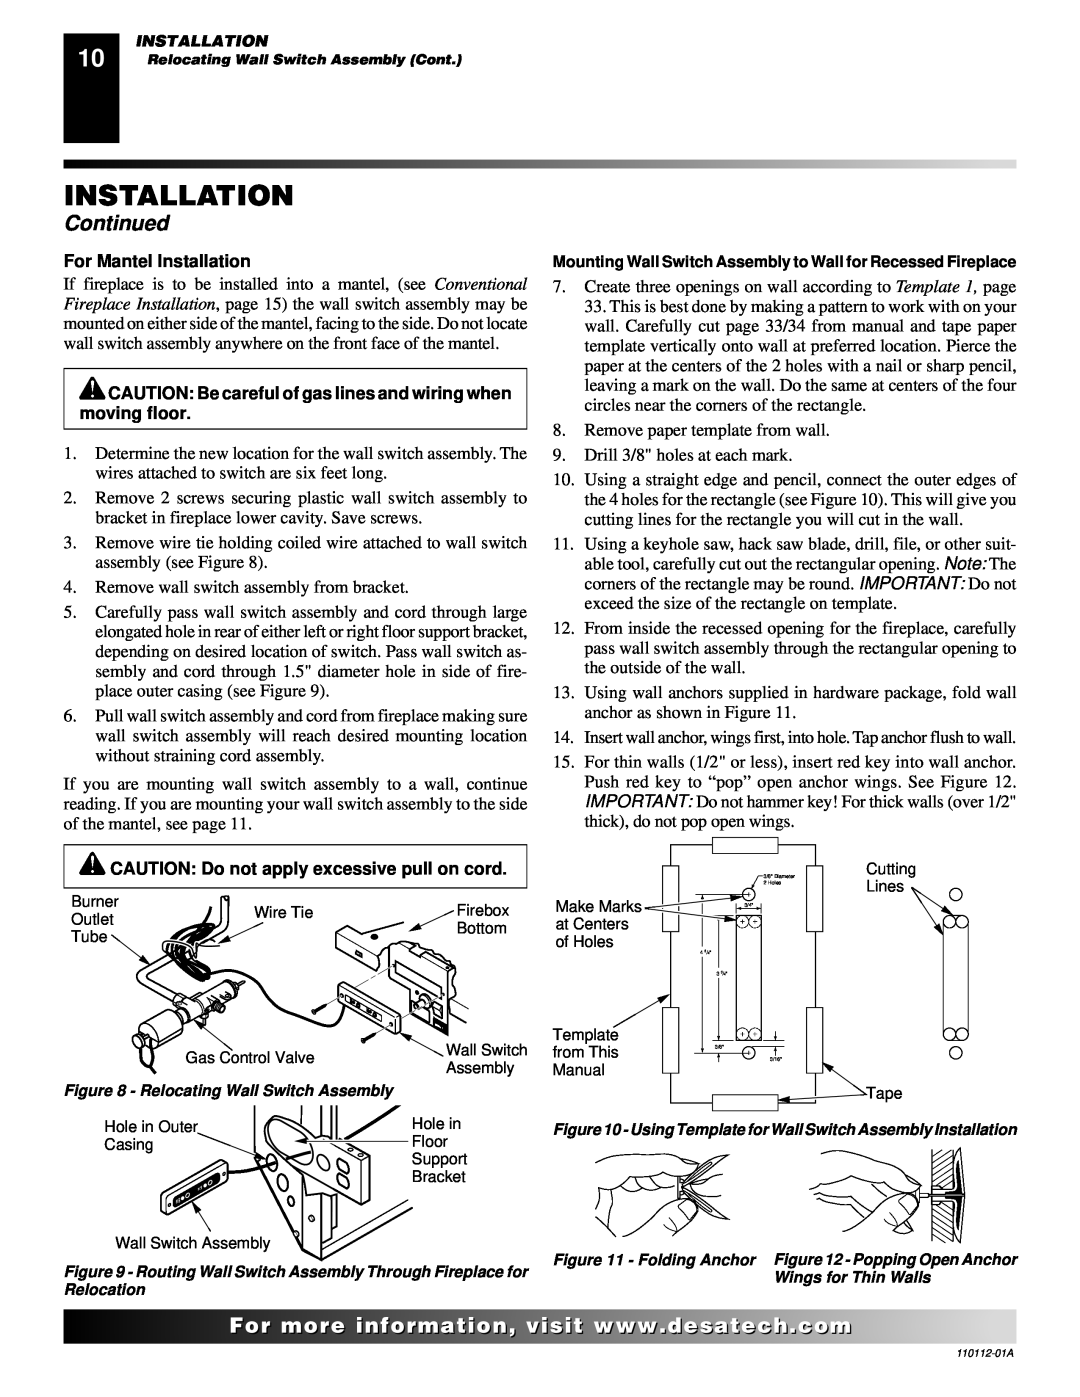 Desa VTGF33NRA Continued, For..com, For Mantel Installation, CAUTION Do not apply excessive pull on cord 